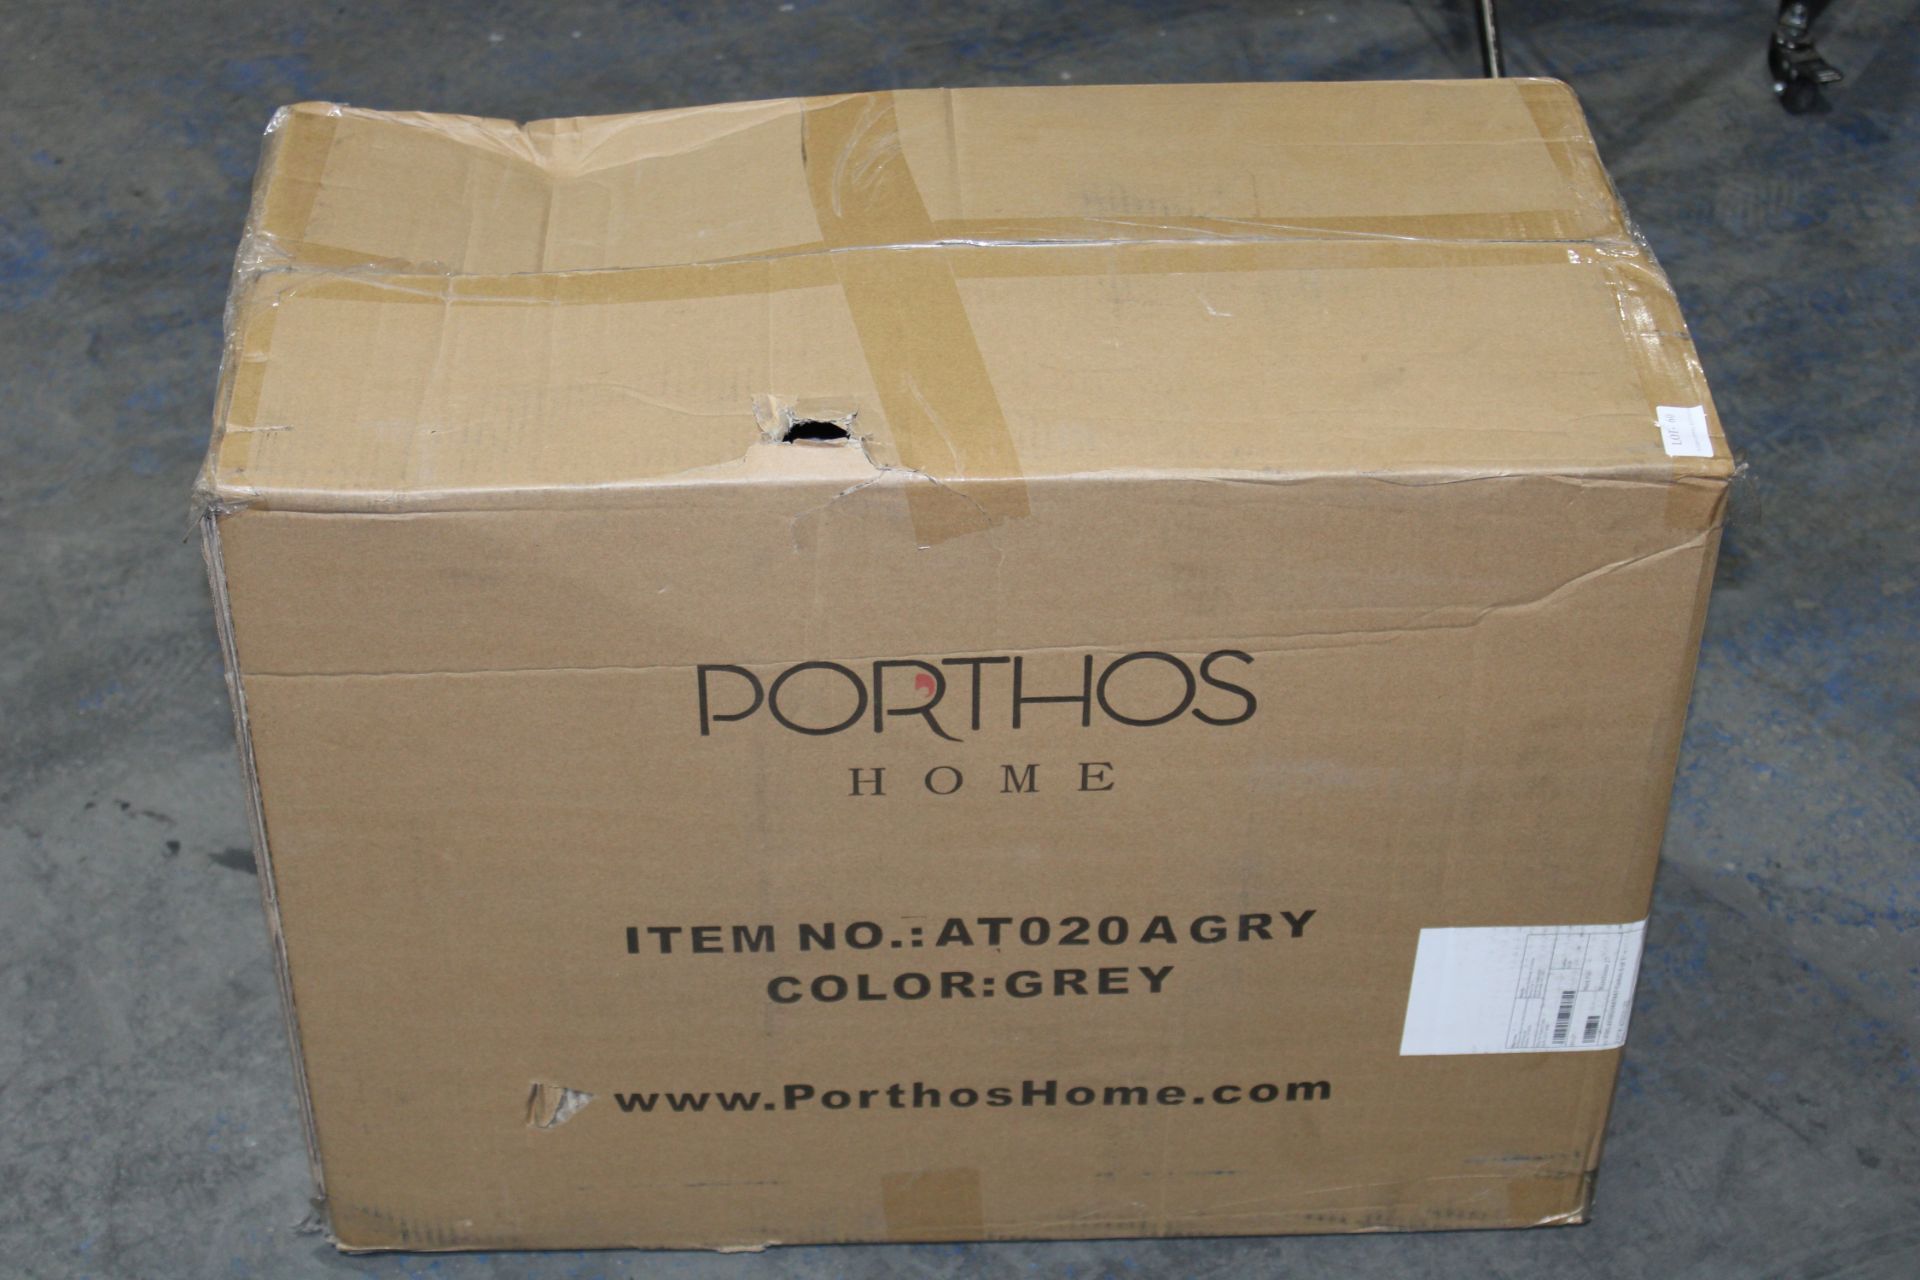 BOXED PORTHOS HOME GAS LIFT SWIVEL BAR STOOL GREY MODEL: AT020 A GRY RRP £67.38 (AS SEEN IN - Image 2 of 2